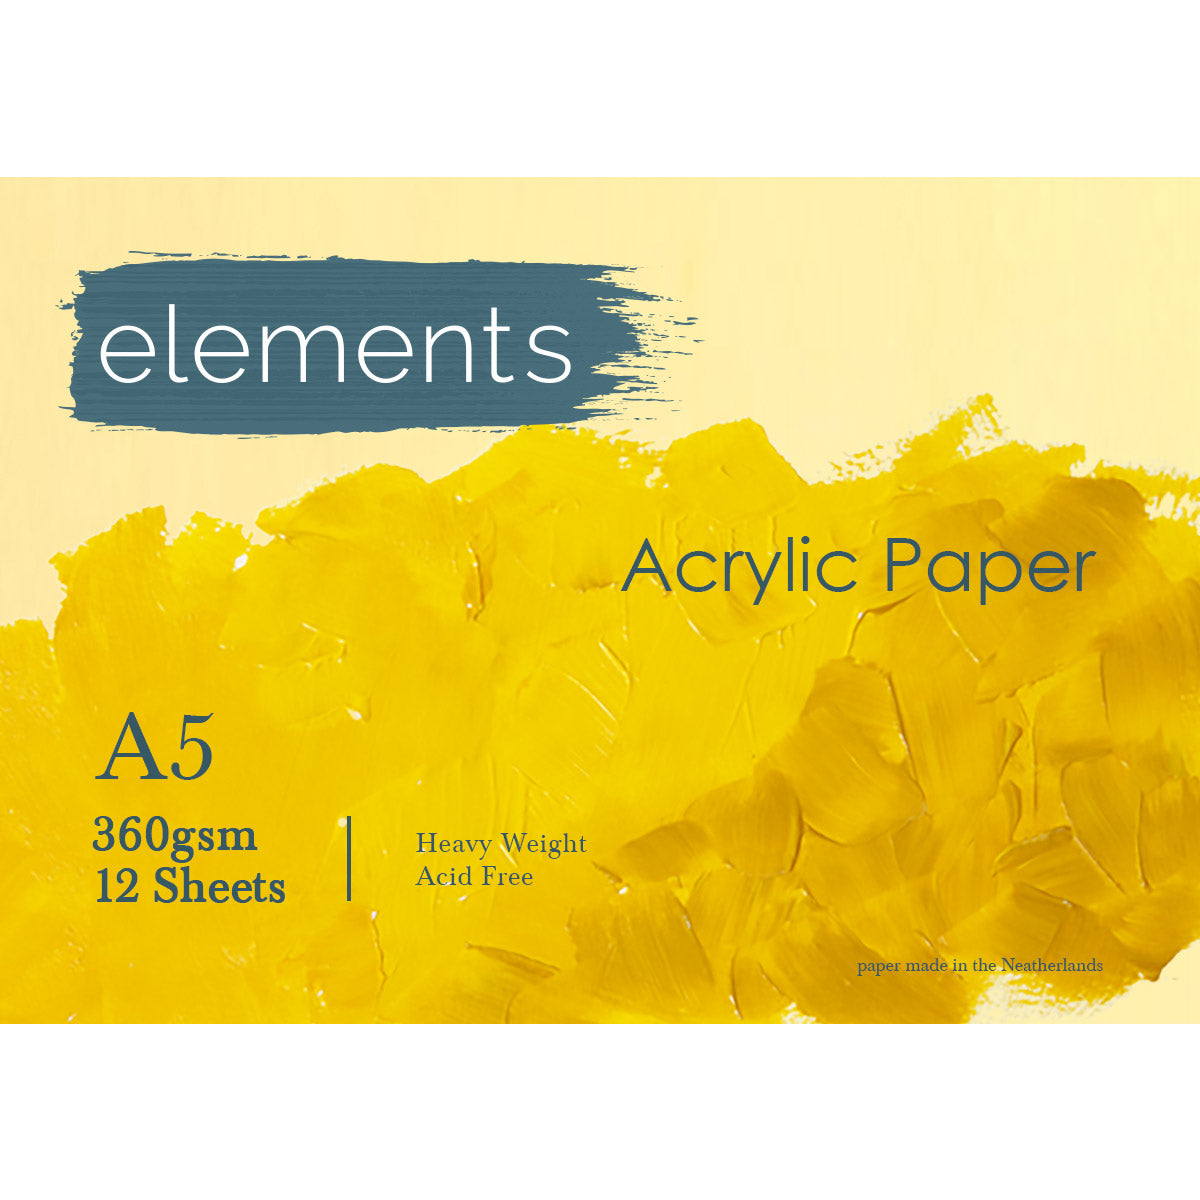 Elements Acrylic Pad - 360gsm - 12 Sheets - A5